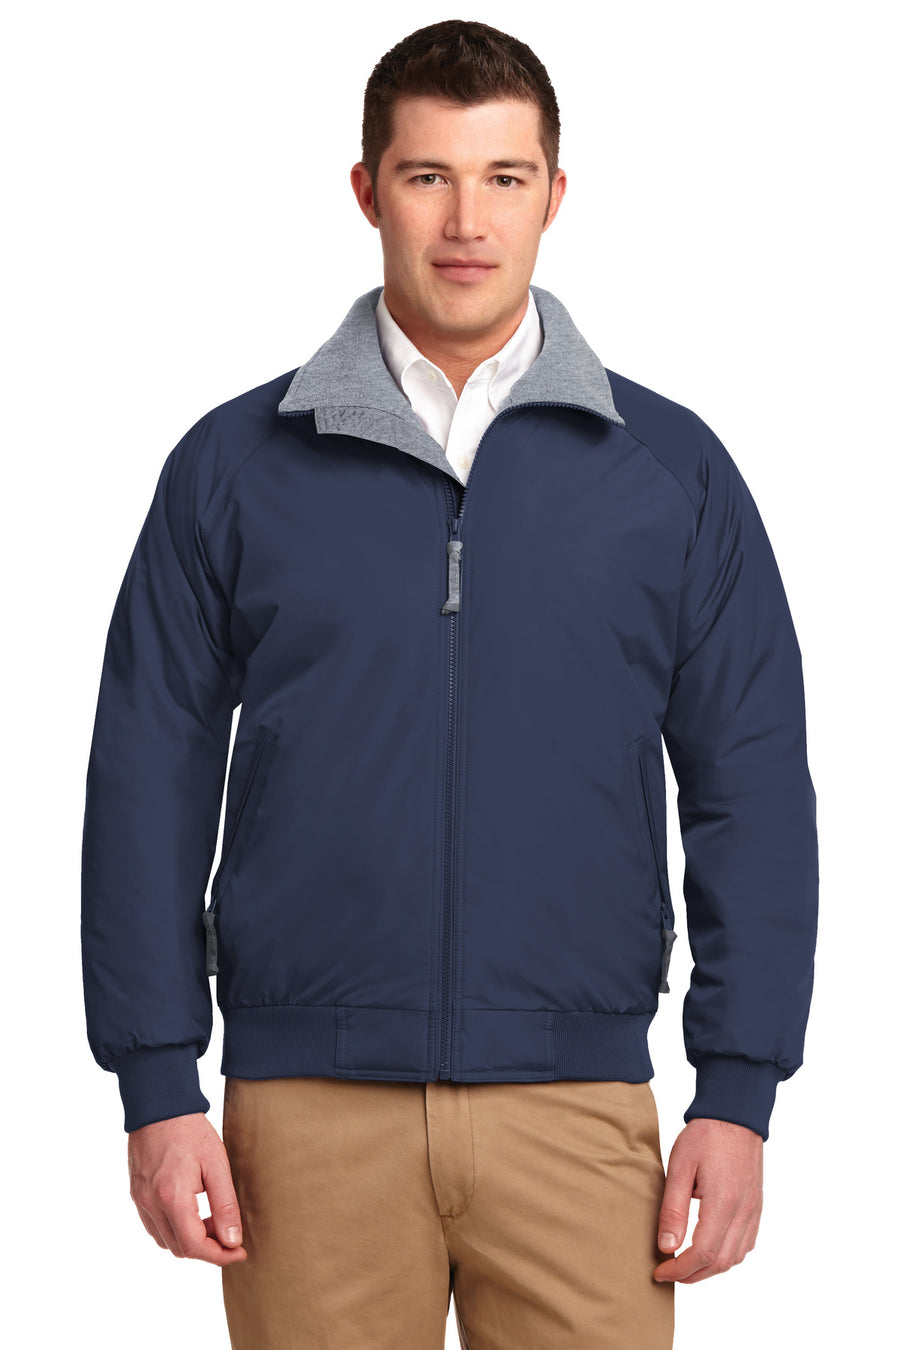 Port Authority Tall Challenger Jacket.